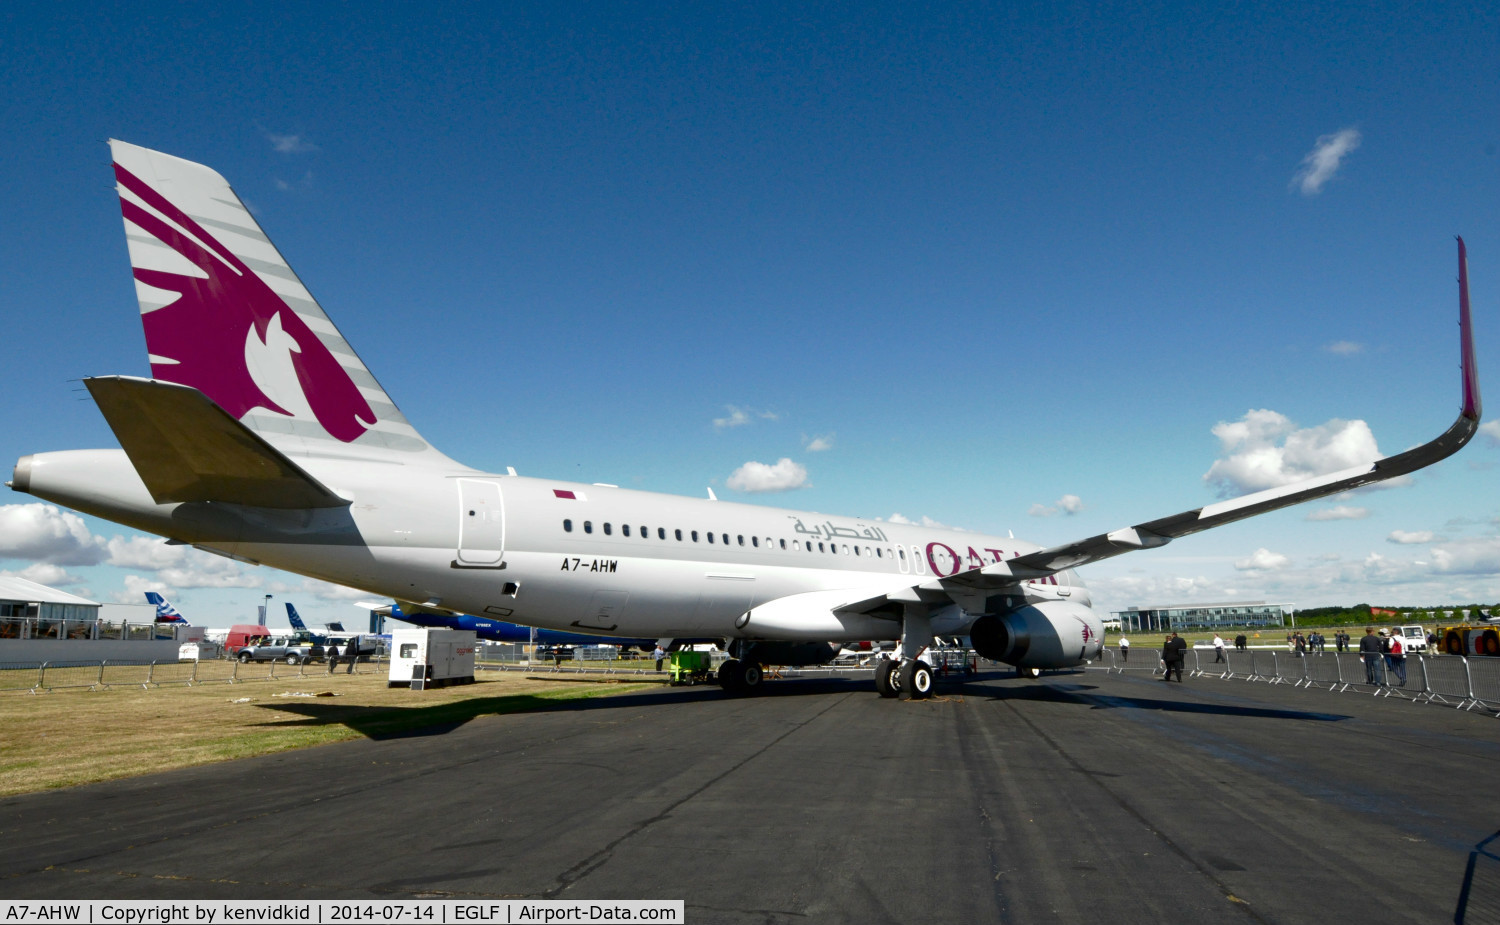 A7-AHW, 2012 Airbus A320-232 C/N 5217, On static display at FIA 2014.